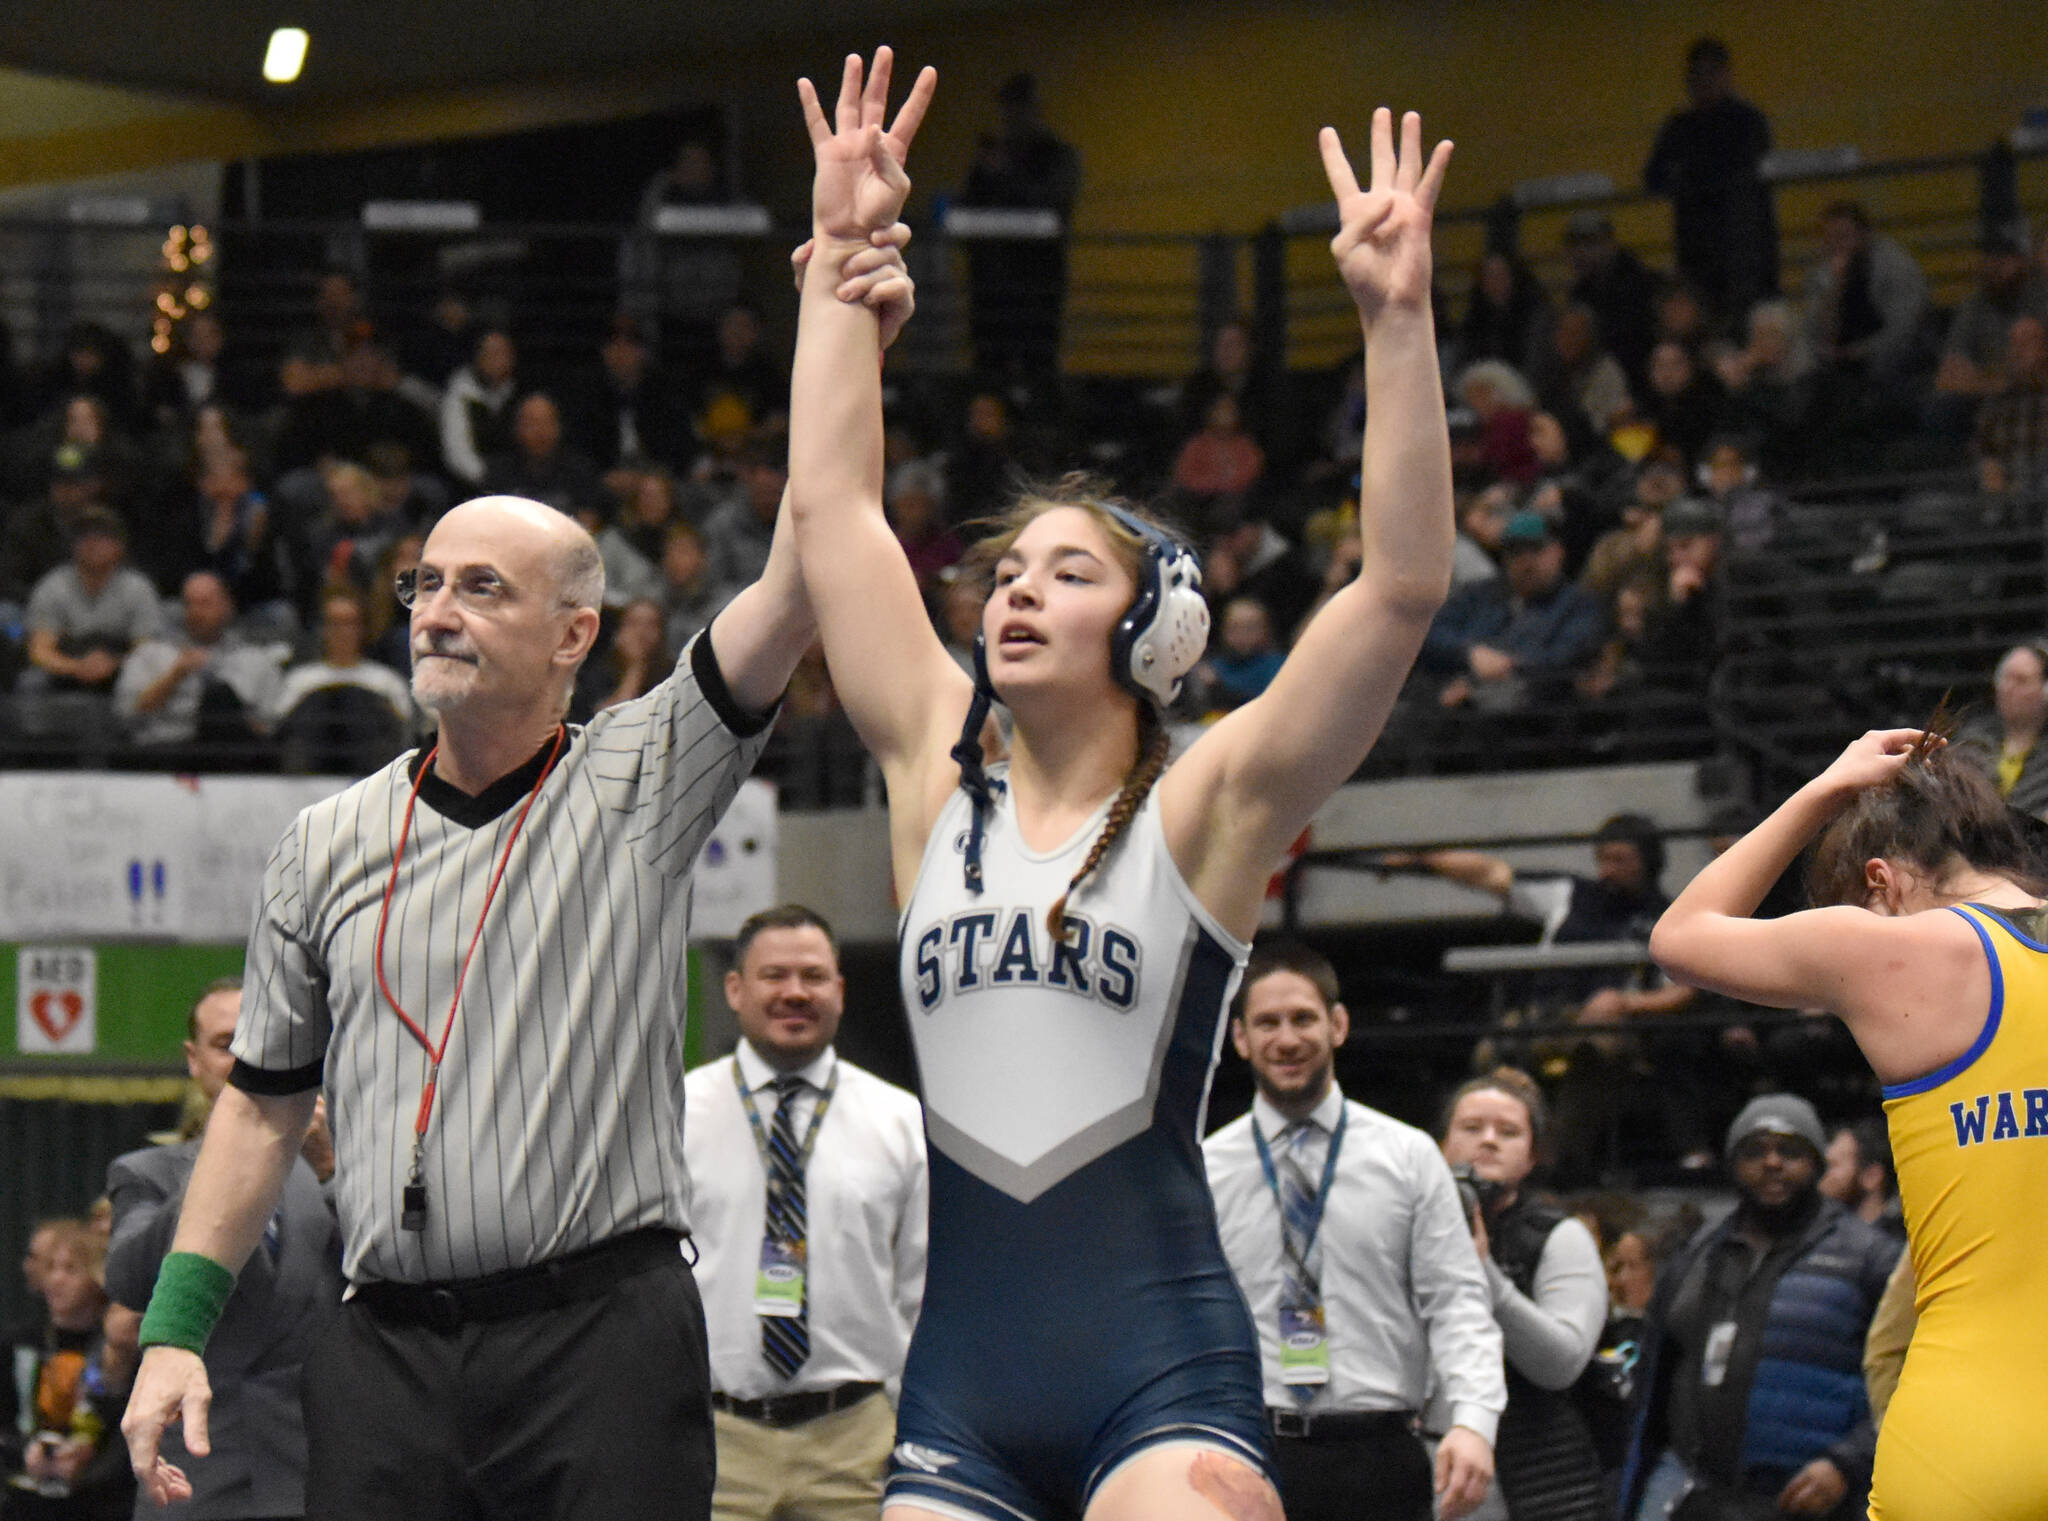 Soldotna’s Trinity Donovan celebrates becoming the third girls in Alaska history to win four state wrestling titles Saturday, Dec. 18, 2022, at the state wrestling tournament at the Alaska Airlines Center in Anchorage, Alaska. (Photo by Jeff Helminiak/Peninsula Clarion)